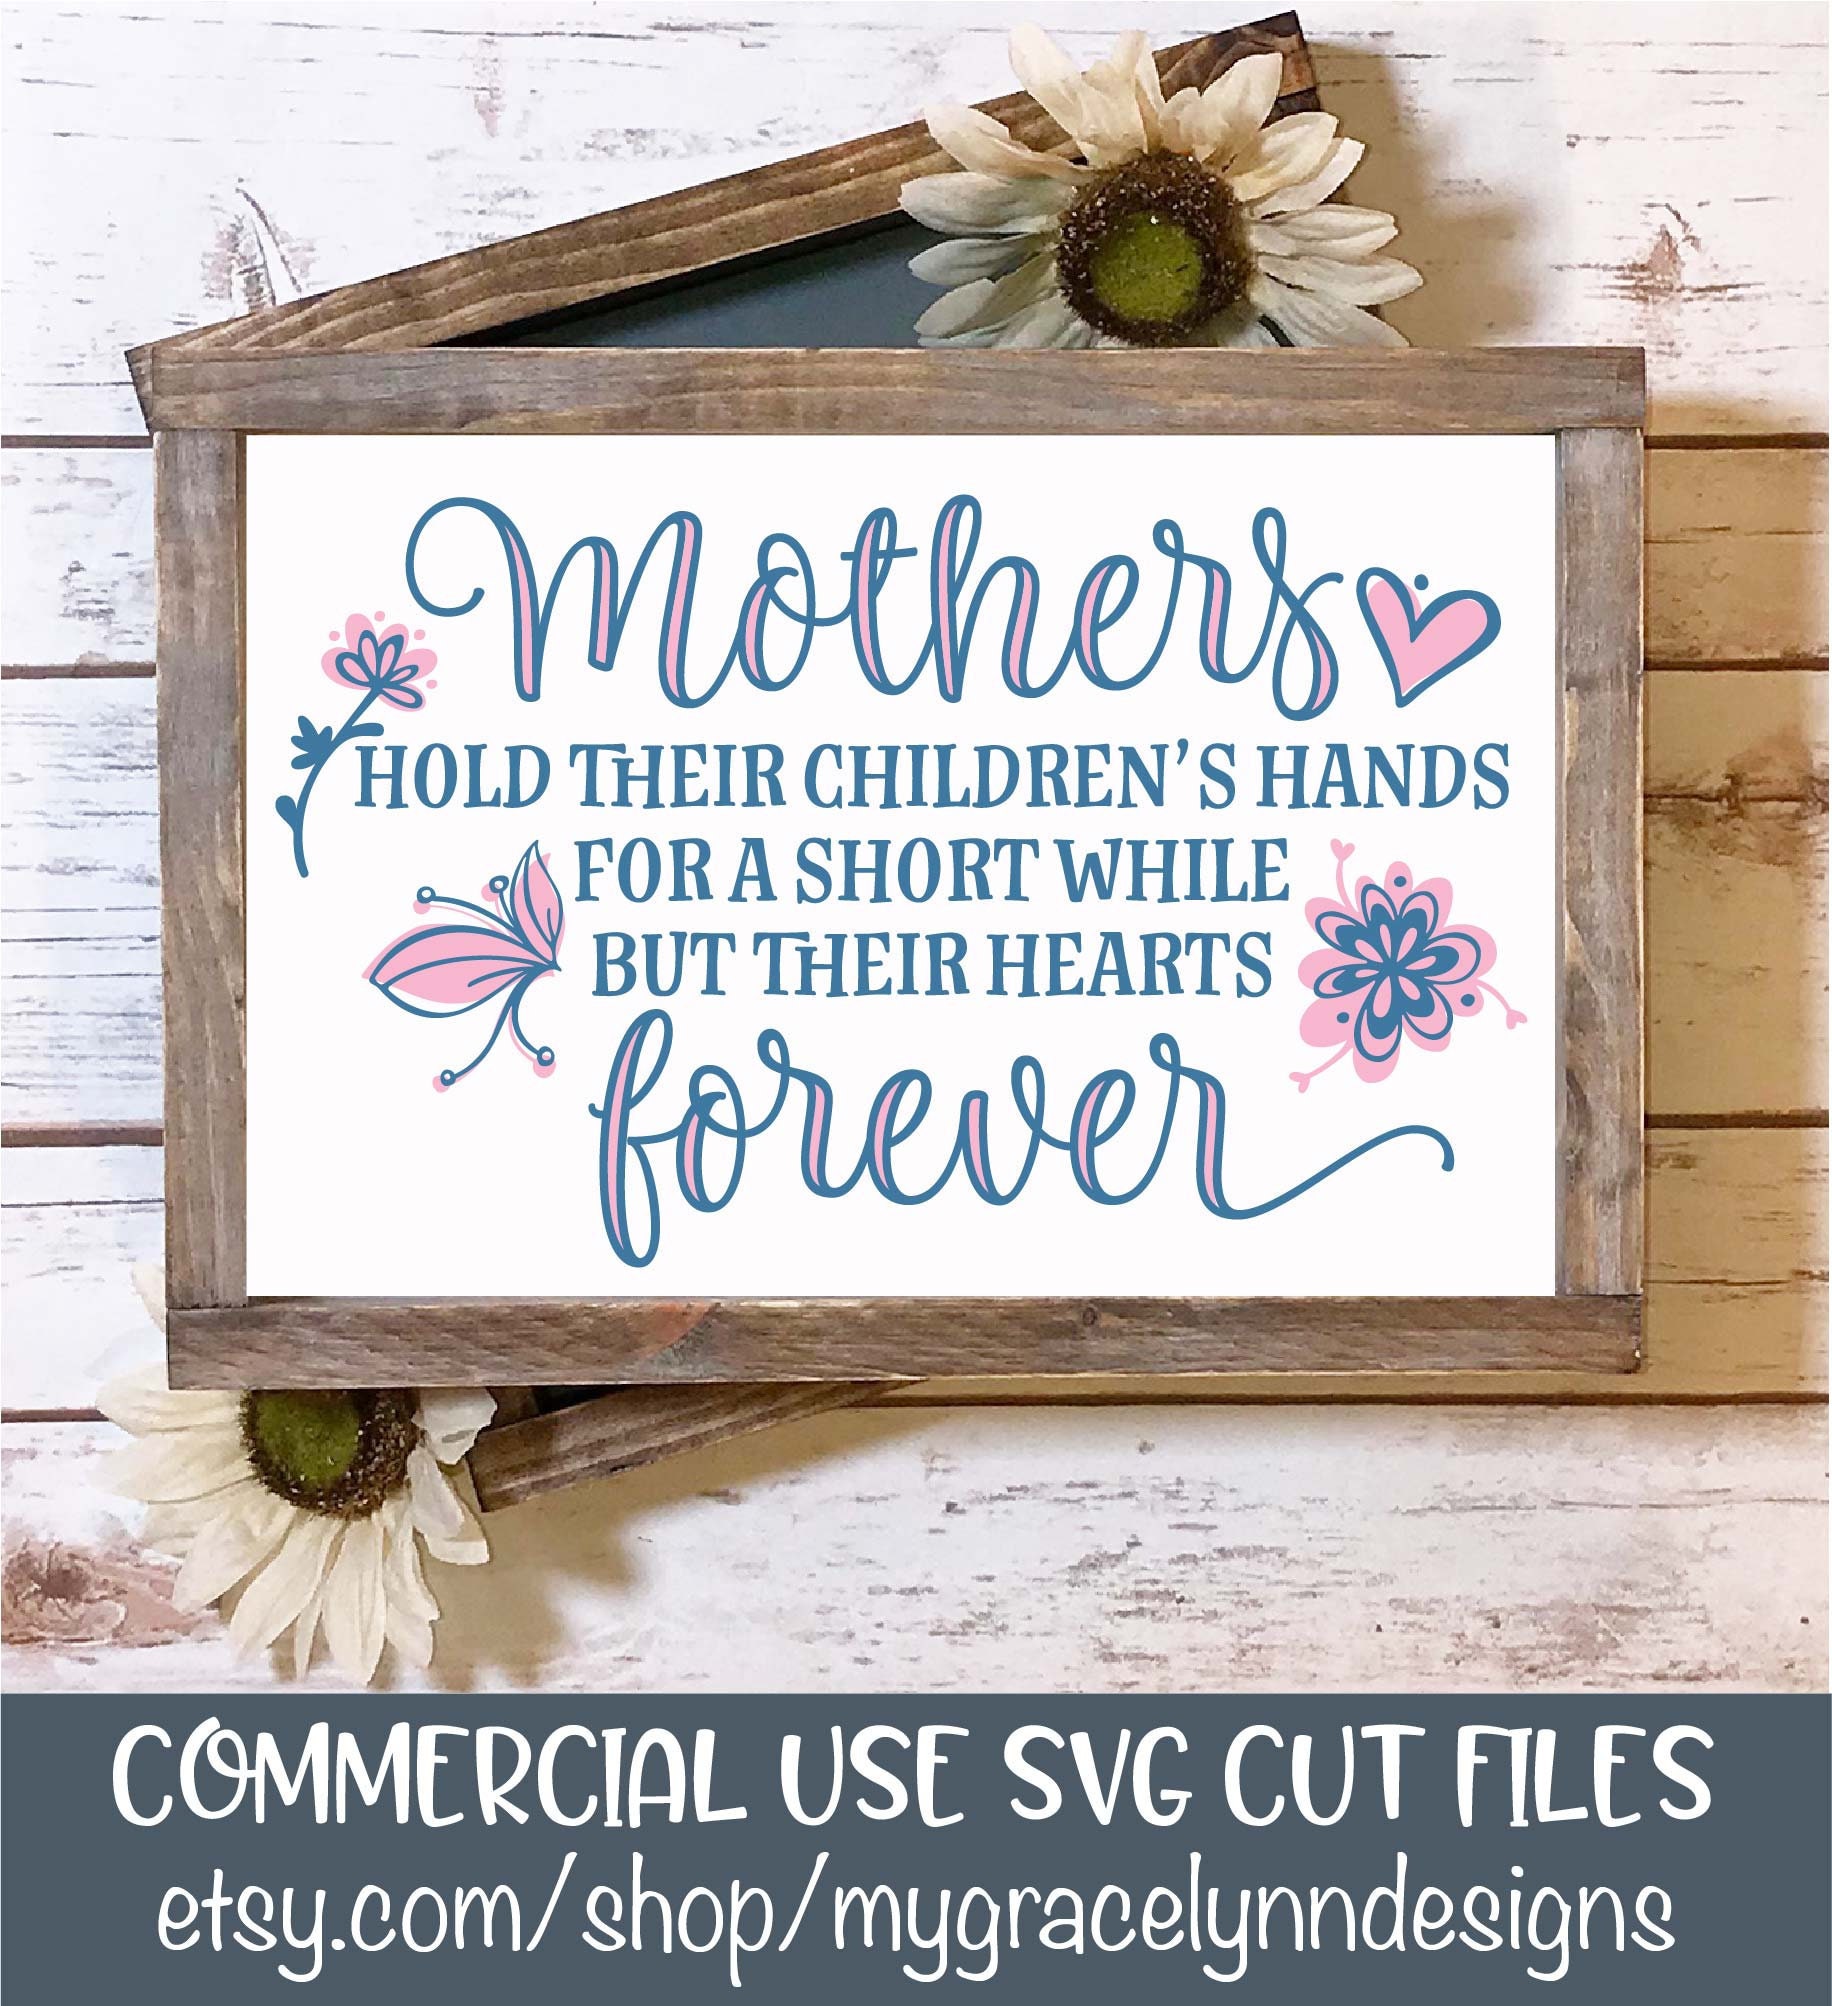 Mother's Hold Our Tiny Hands Quote, Handprint Art Keepsake, Mother's Day  Handprint Craft for Kids, Printable Template, DIY Handprint Art. 